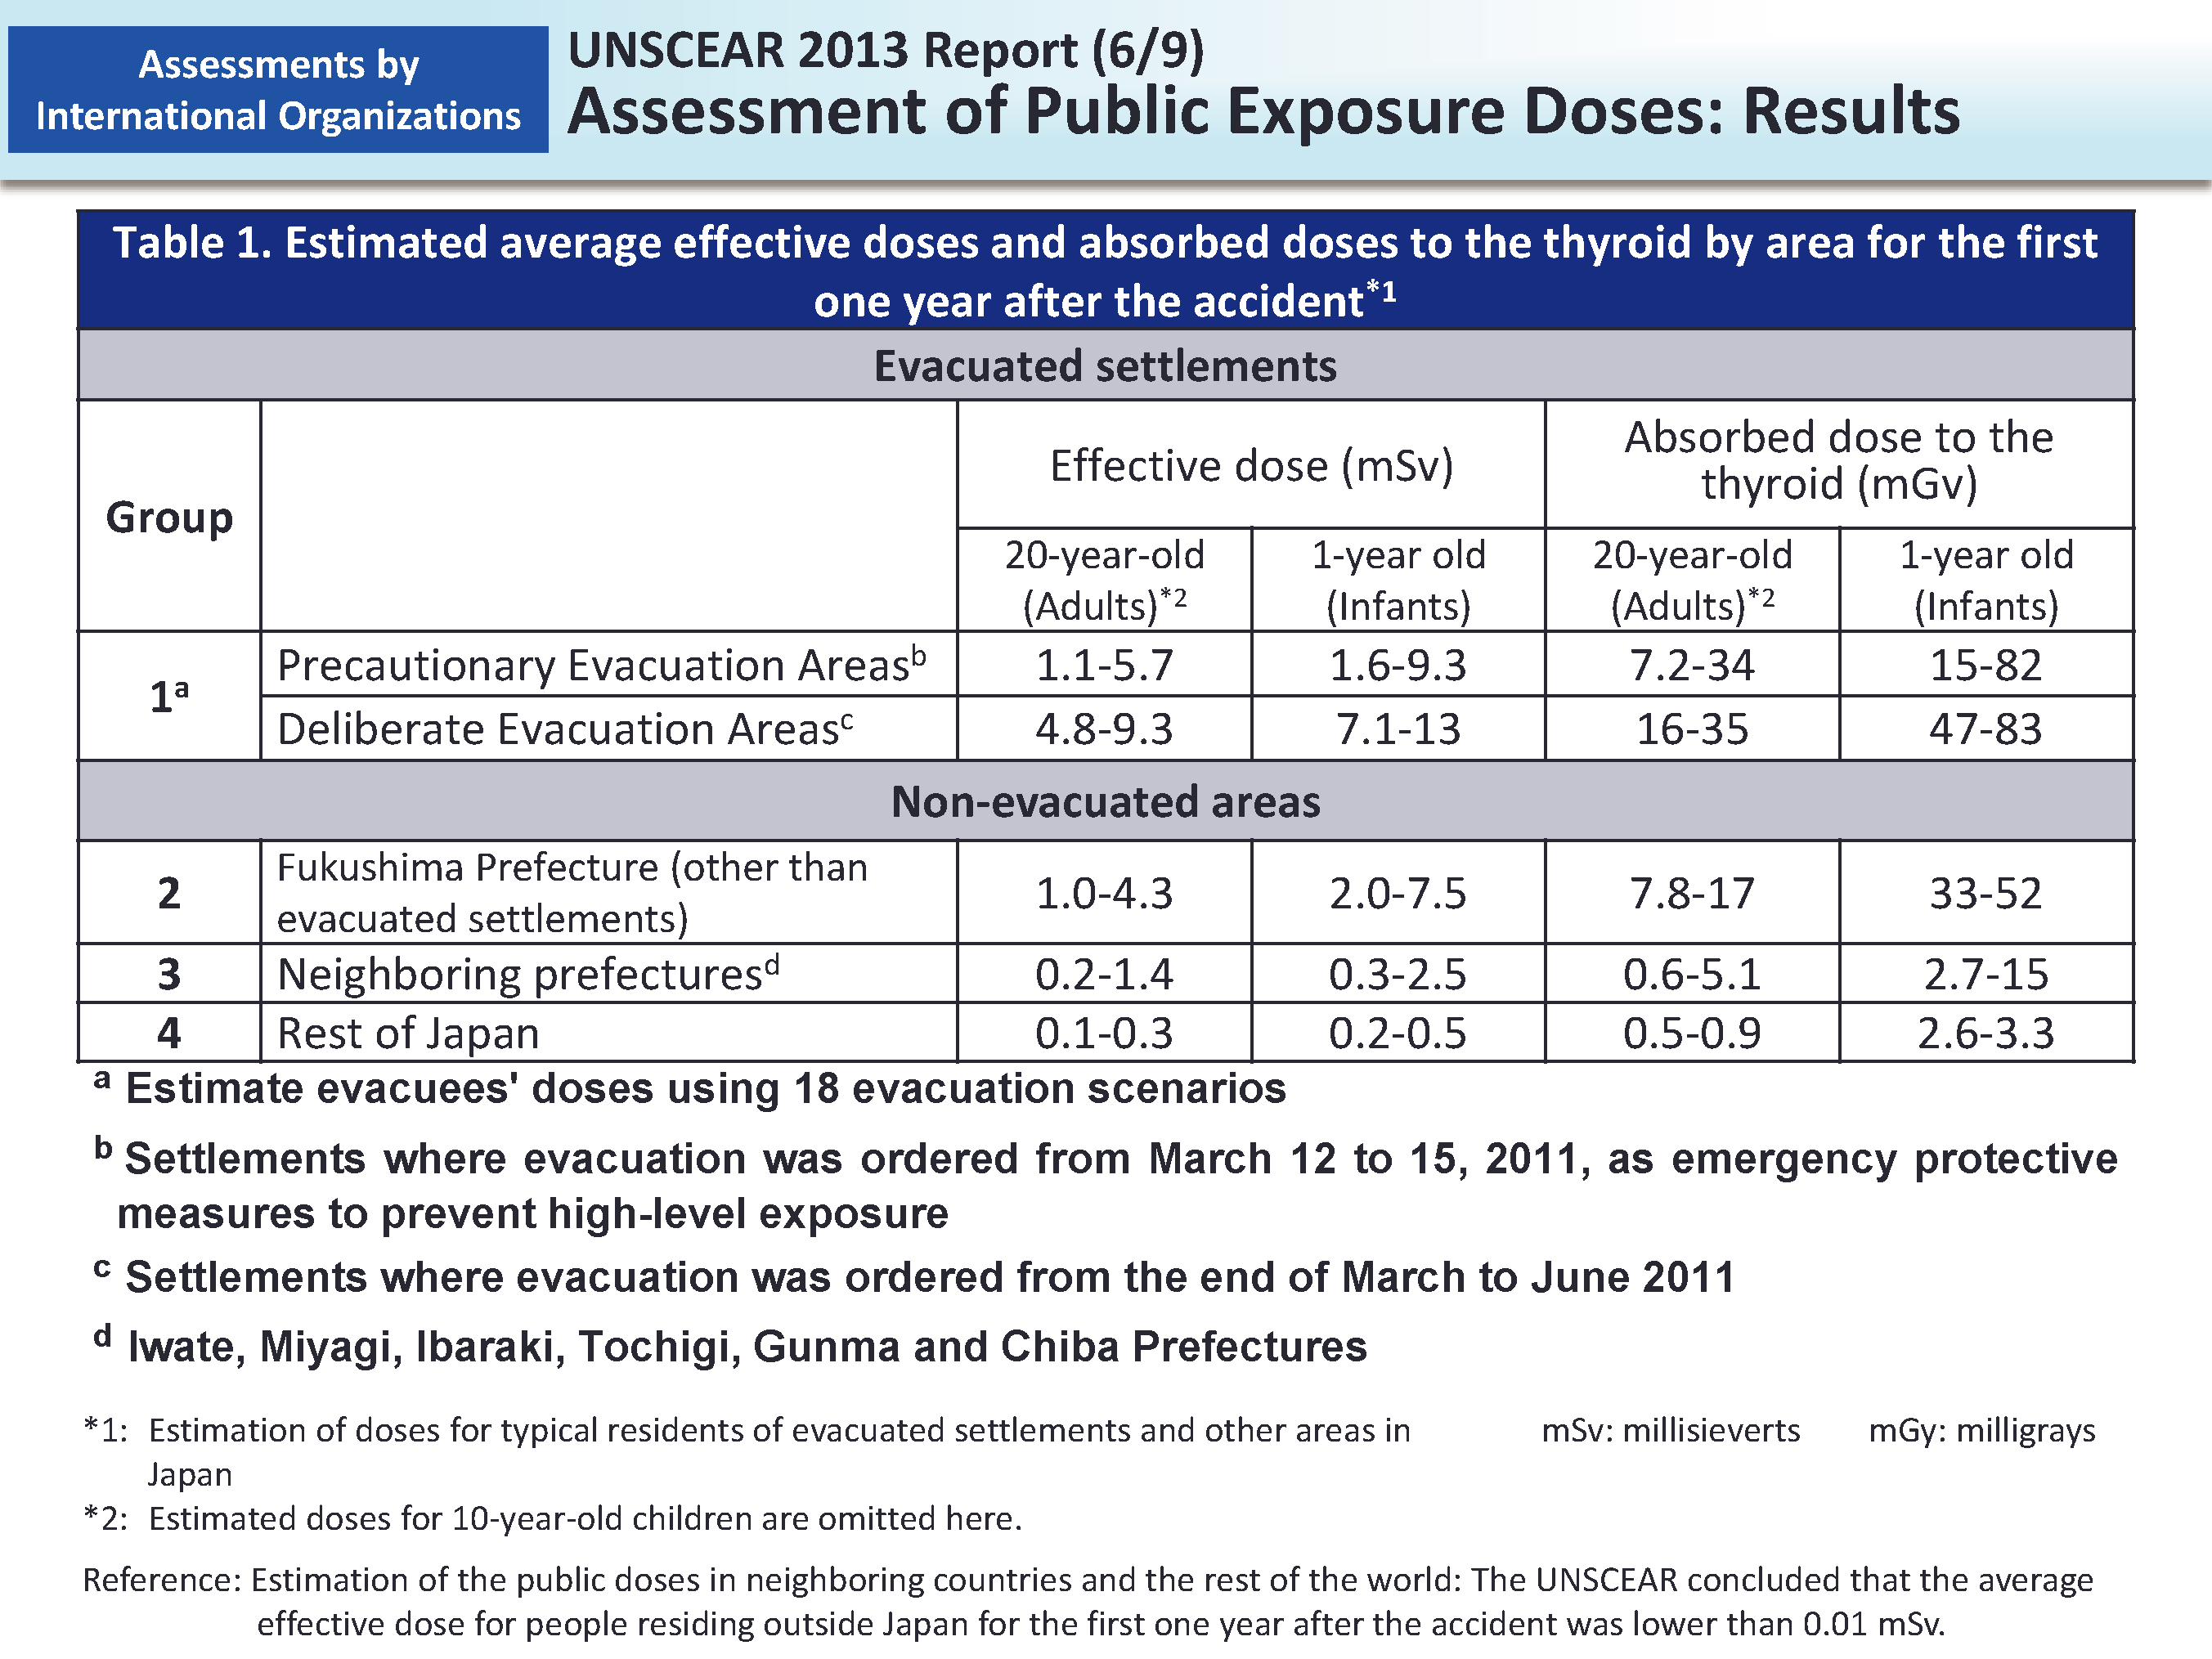 UNSCEAR 2013 Report (6/9) Assessment of Public Exposure Doses: Results_Figure